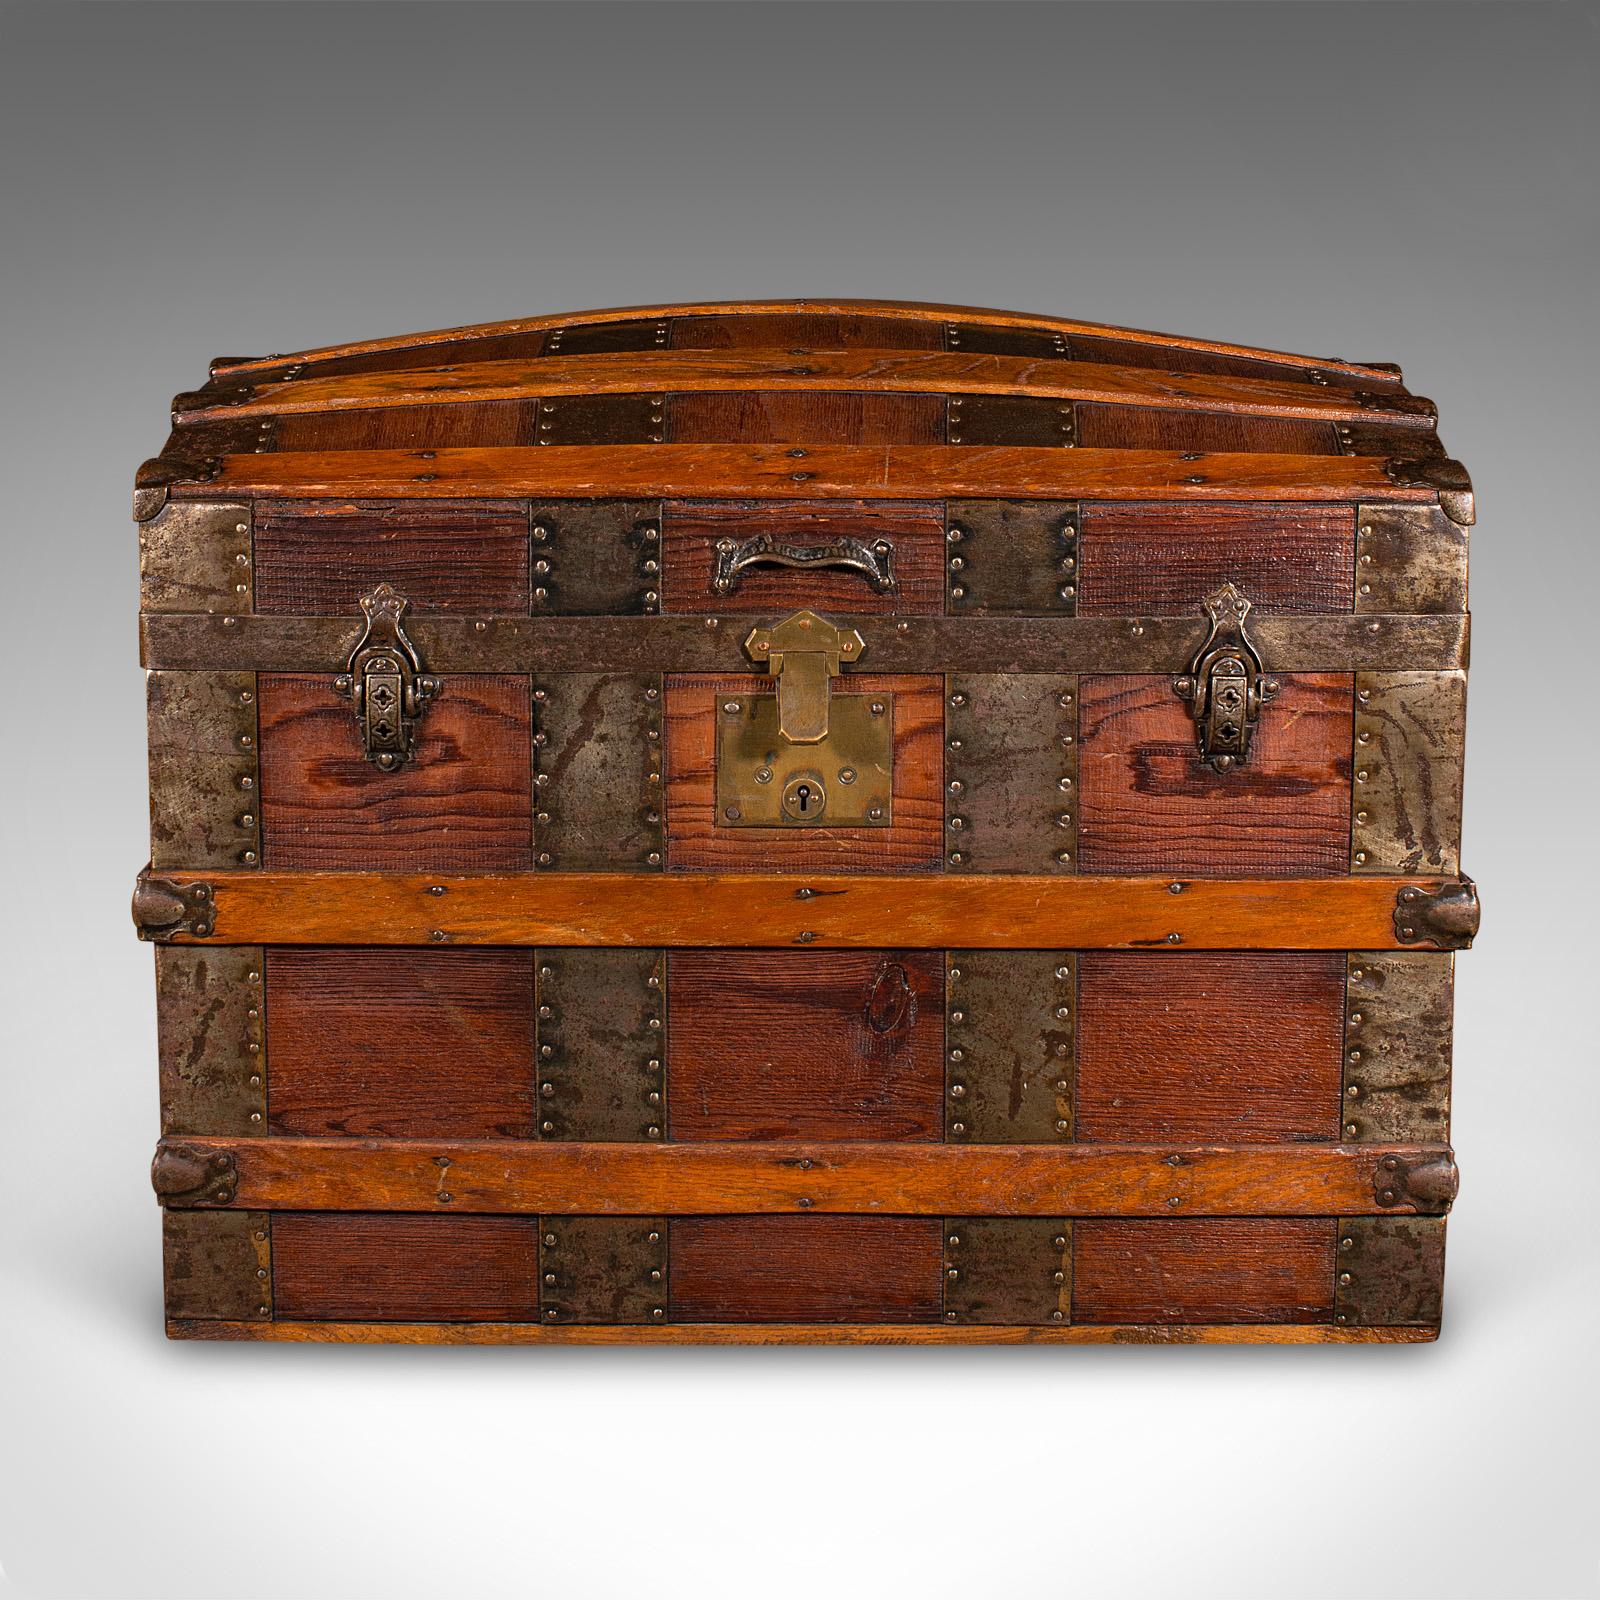 British Antique Dome Topped Chest, English, Pine, Shipping Trunk, Victorian, Circa 1870